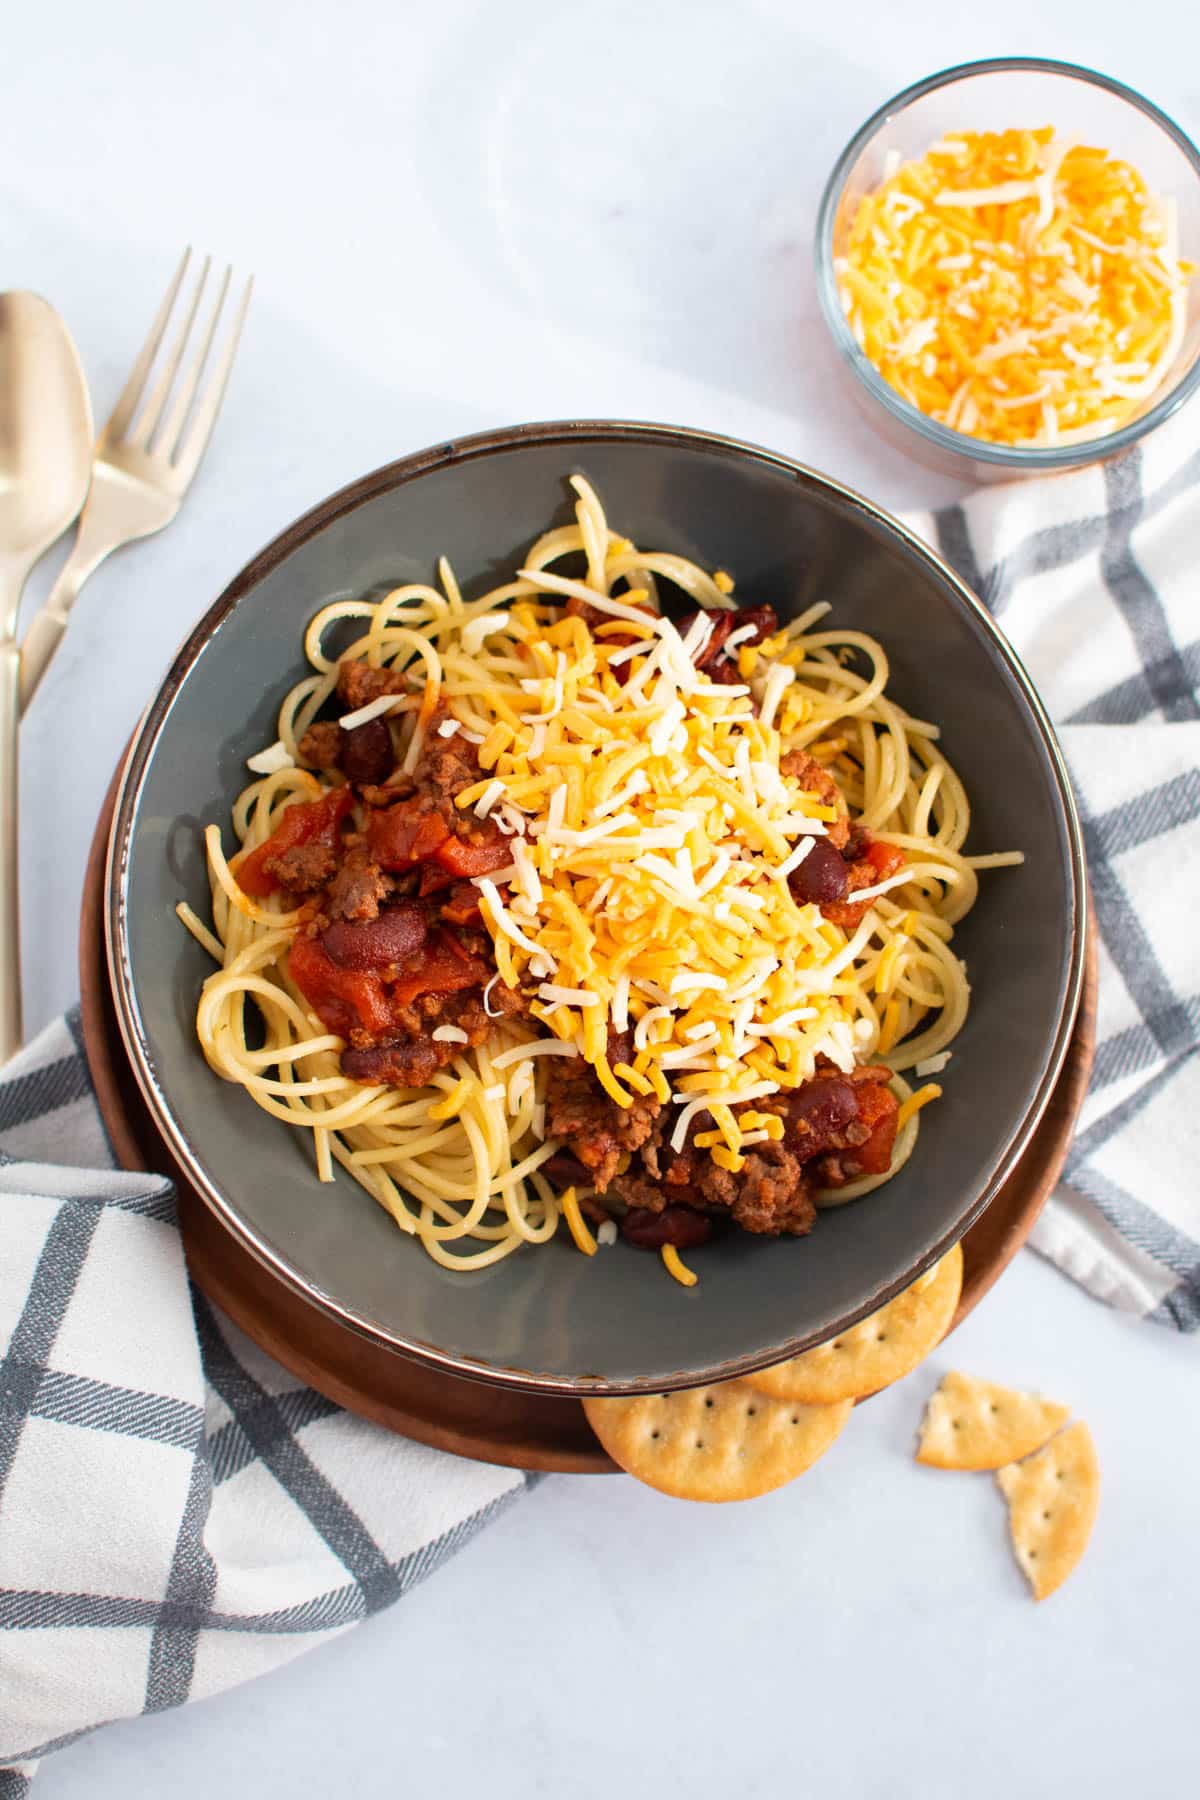 A bowl of spaghetti with meat, cheese and crackers.